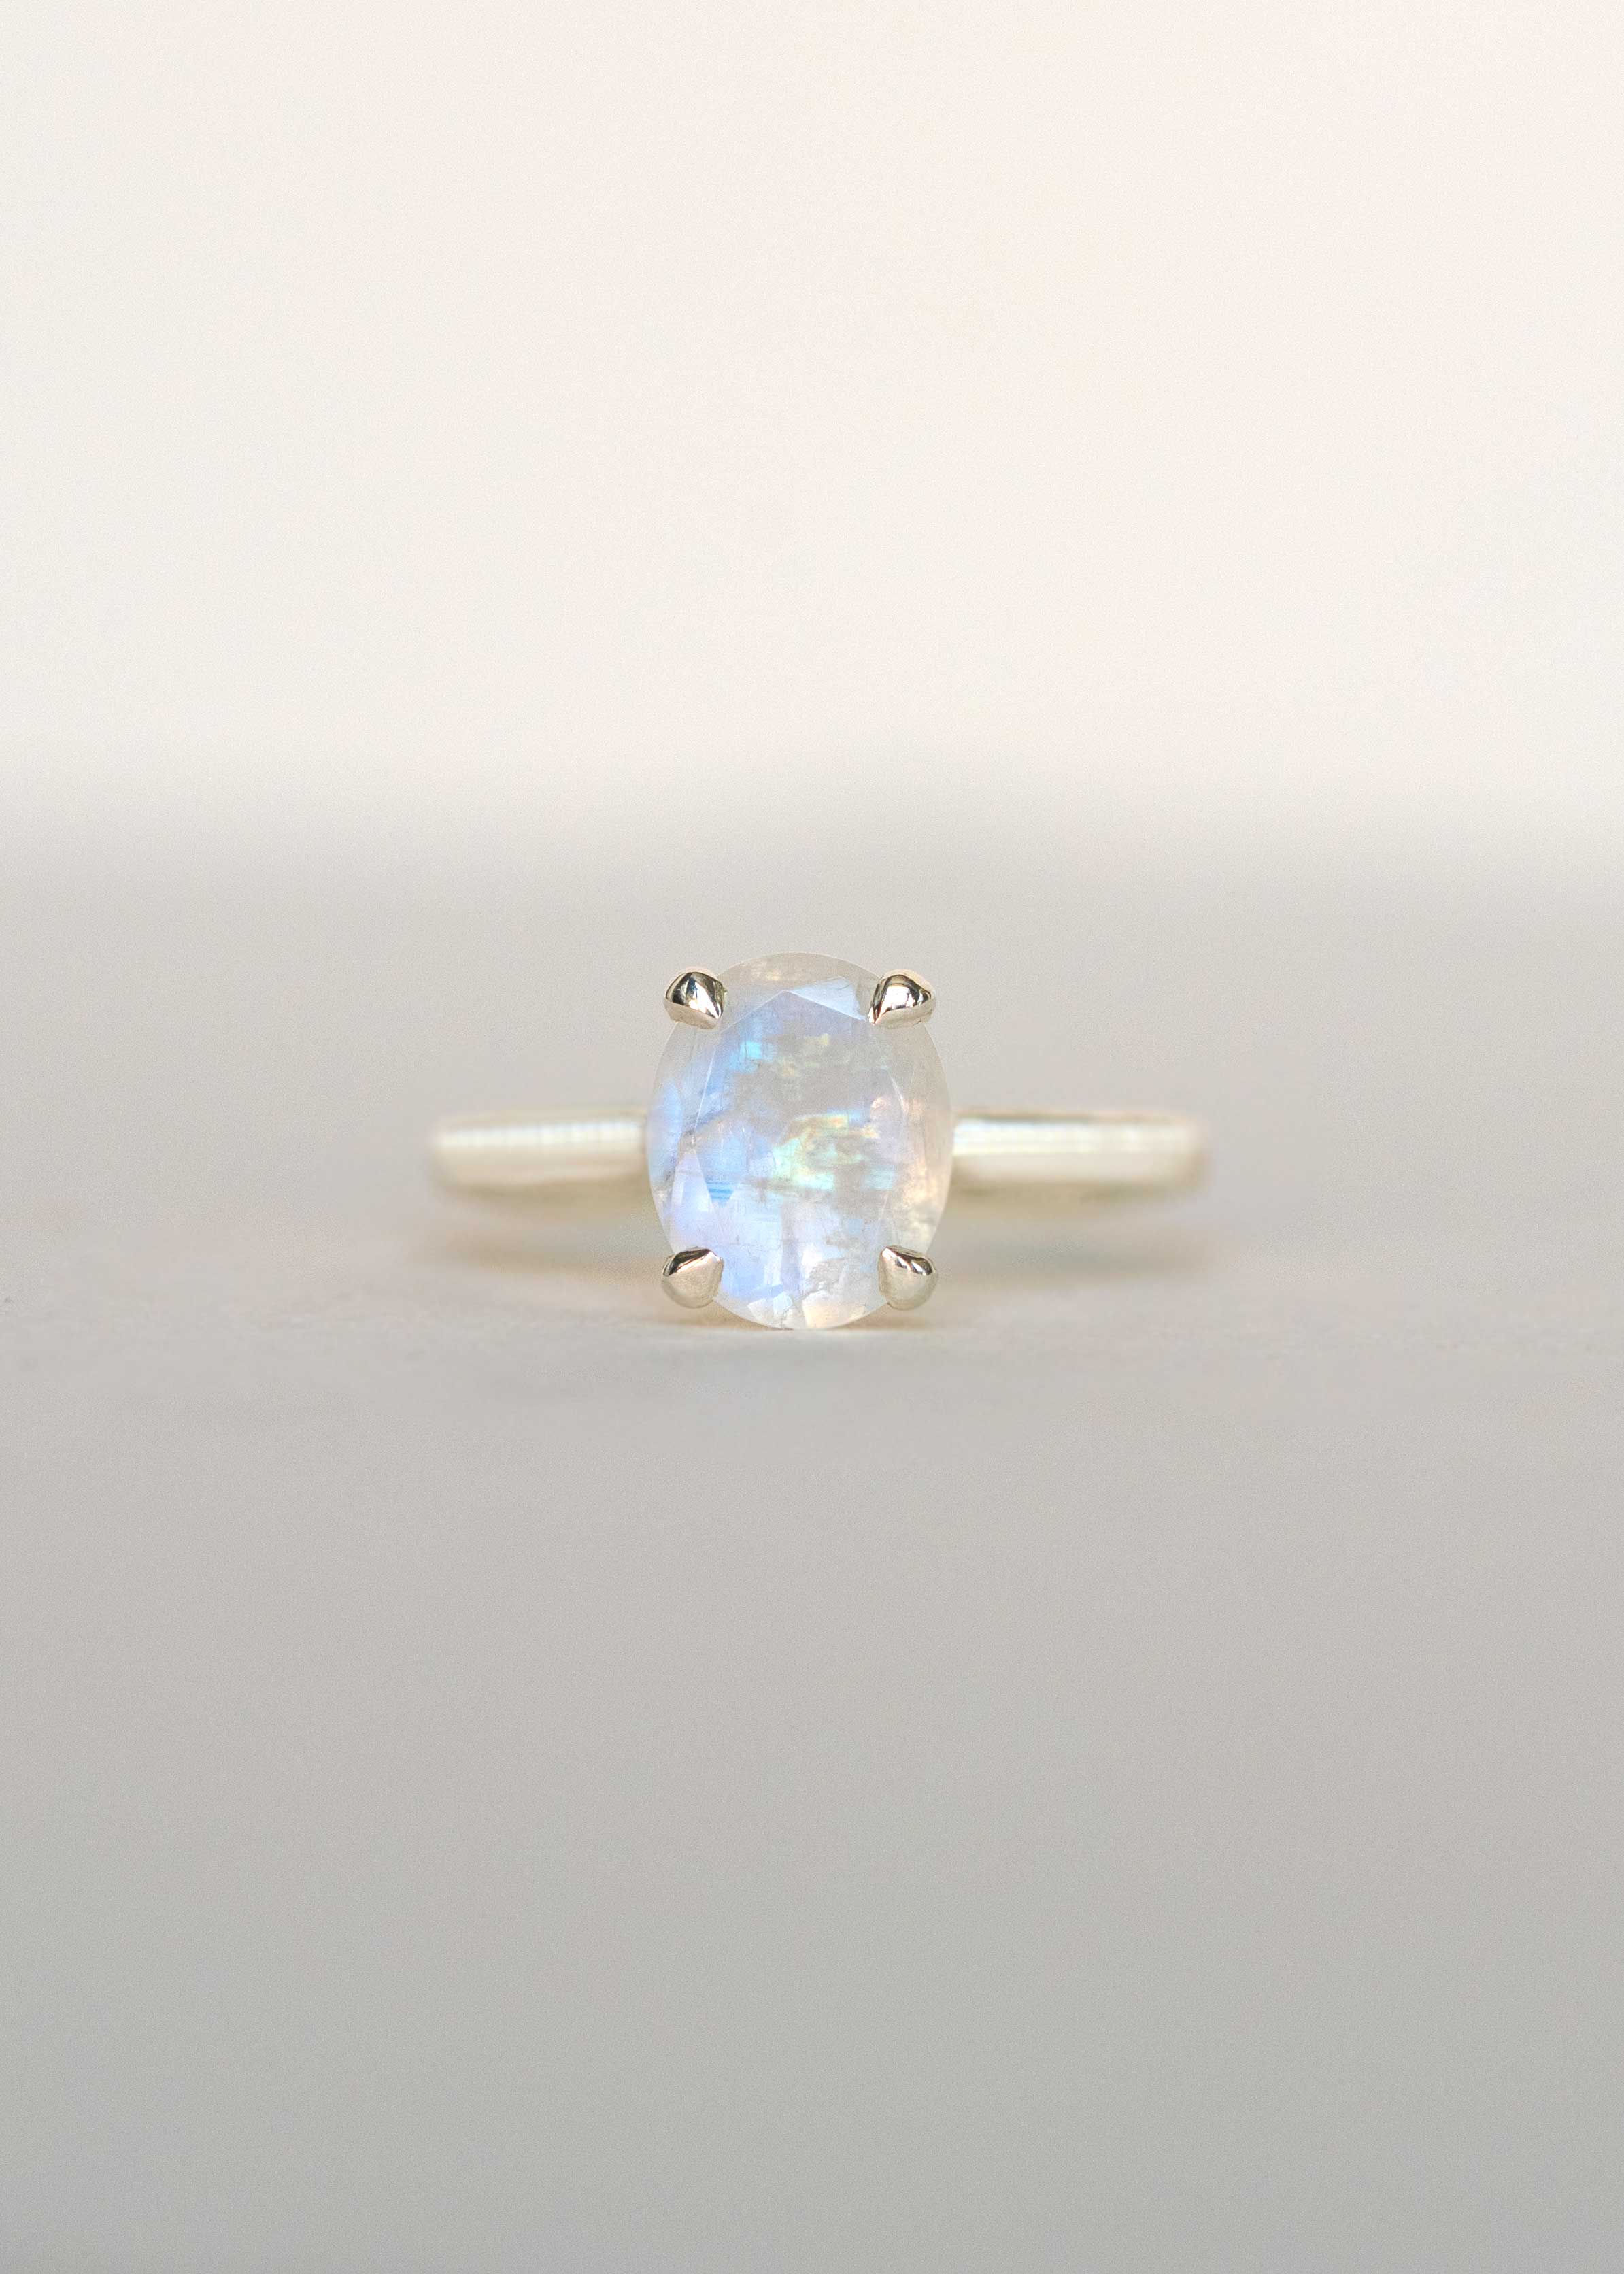 Large Moonstone Ring Sterling Silver, Oval Natural Gemstone Engagement Ring for Women